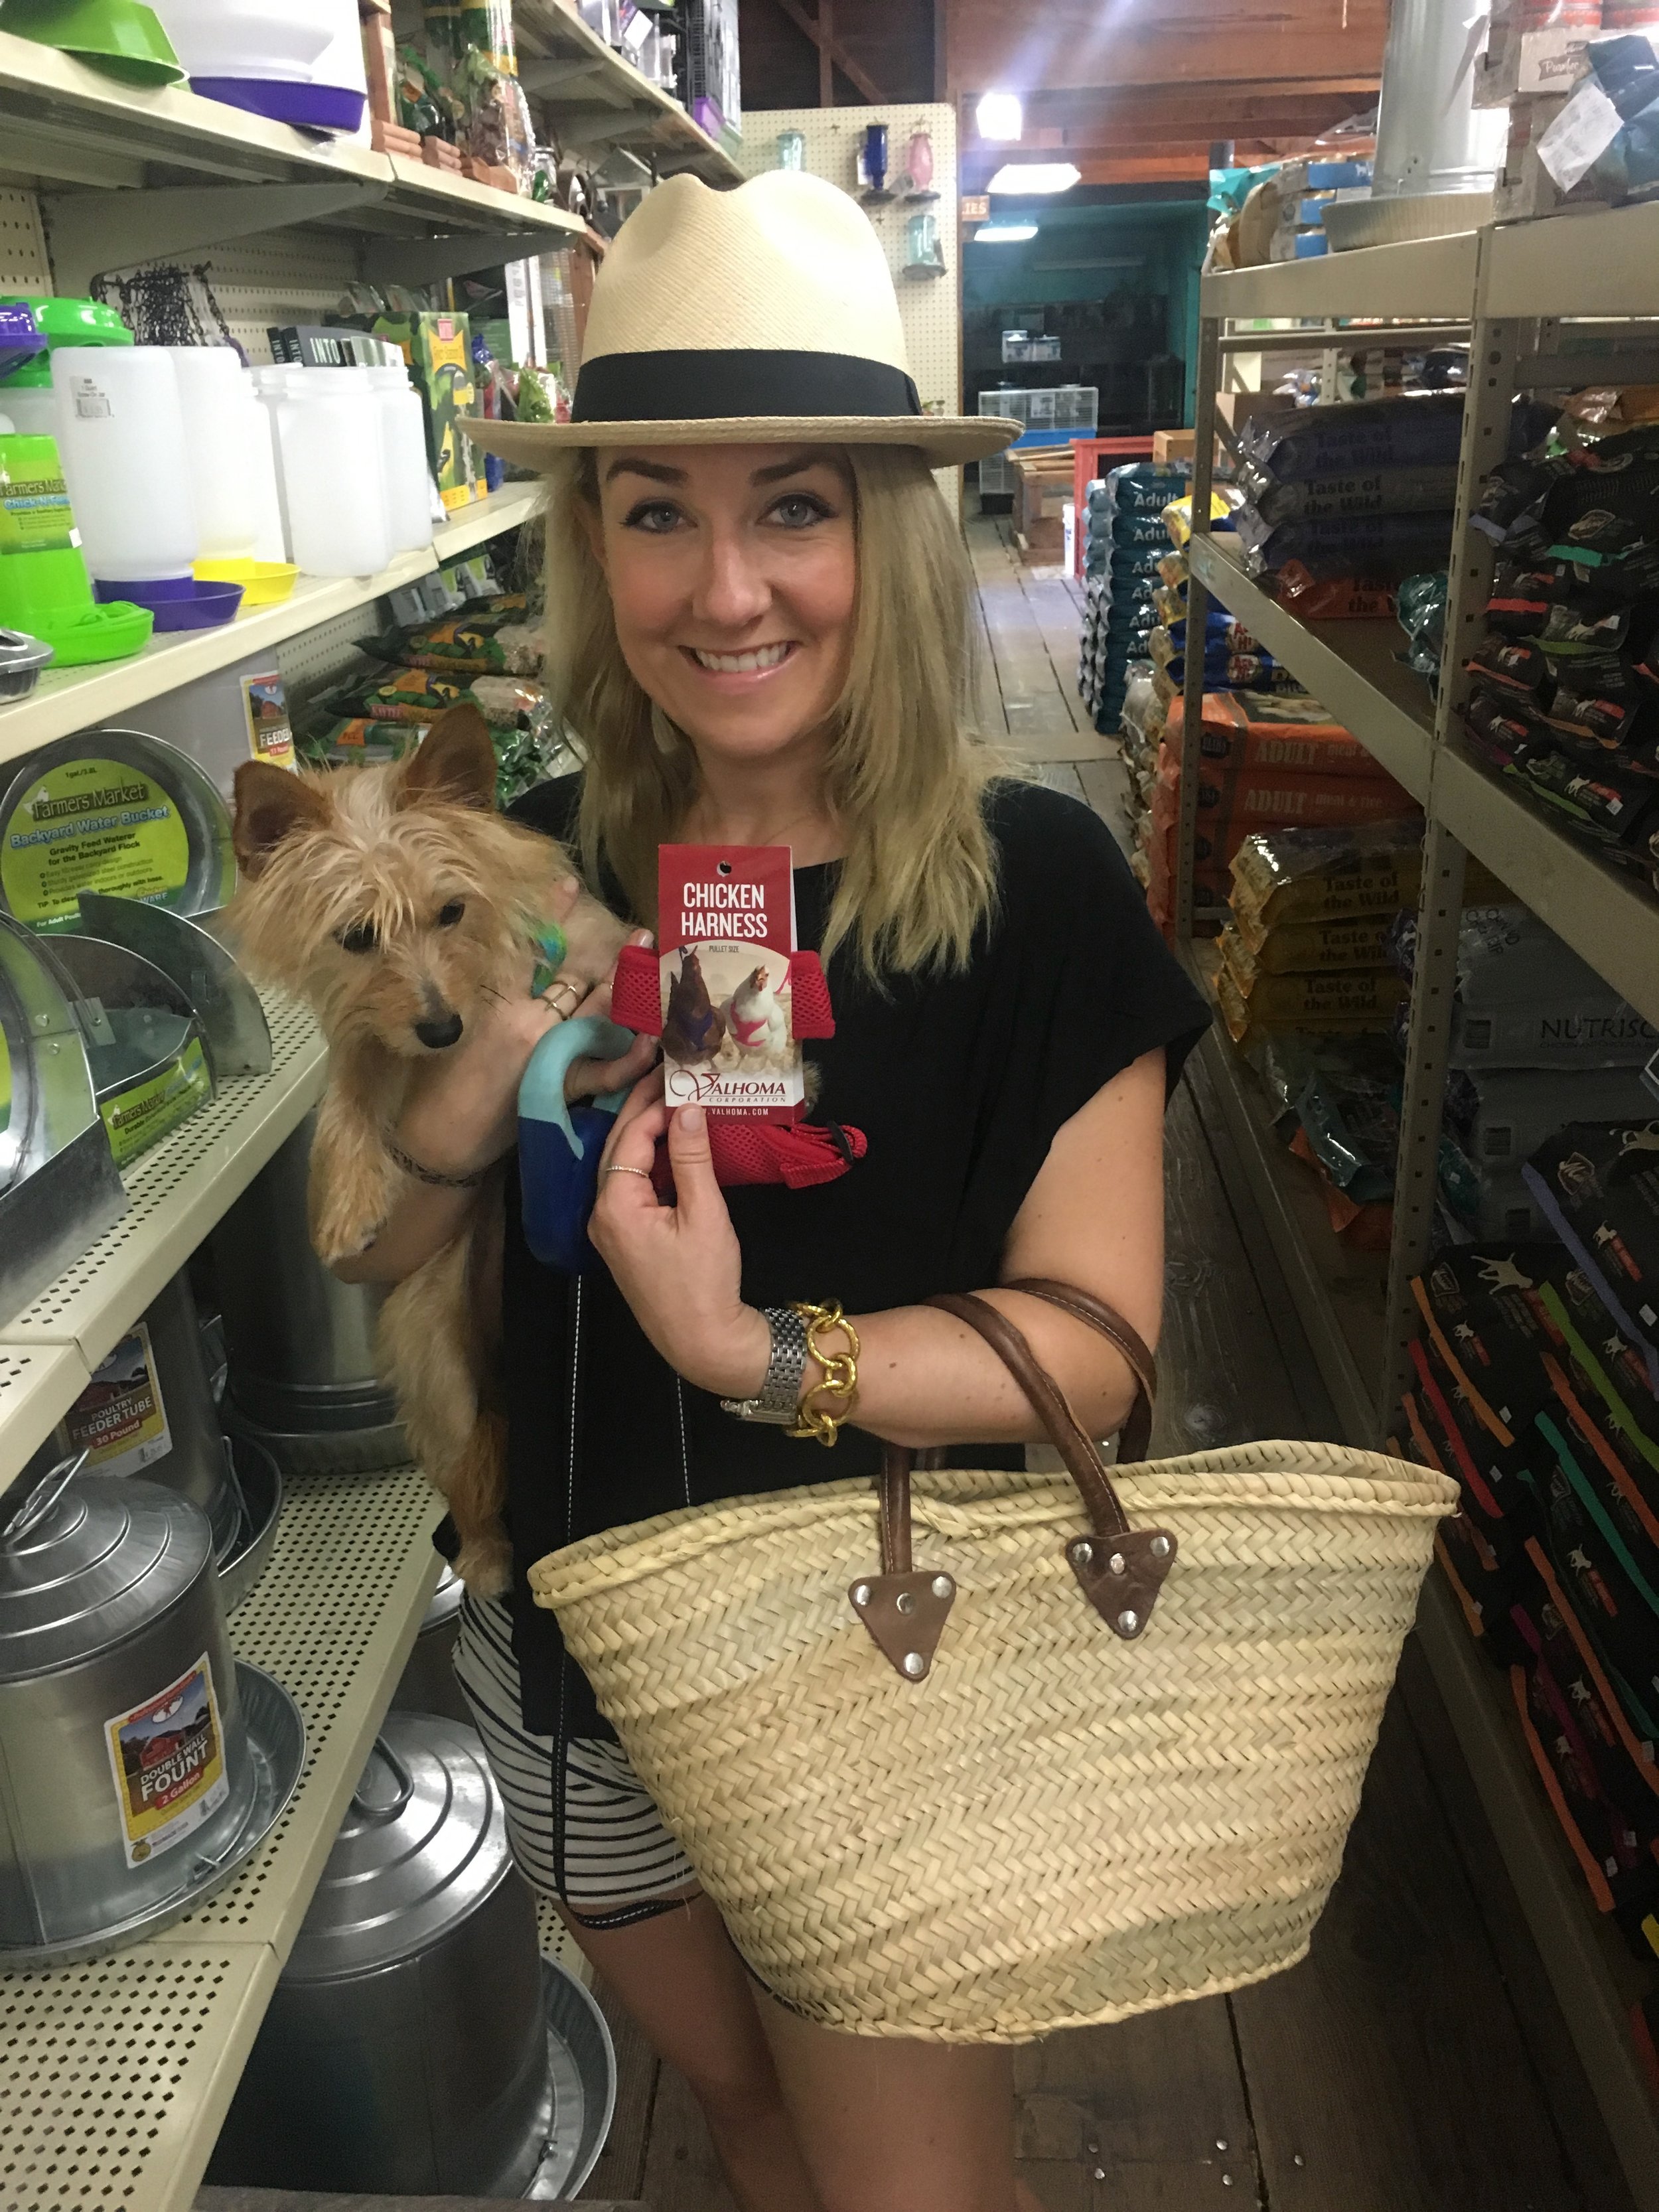 A stop at Wachter Hay &amp; Grain, where you can buy pet supplies, including chicken harnesses...